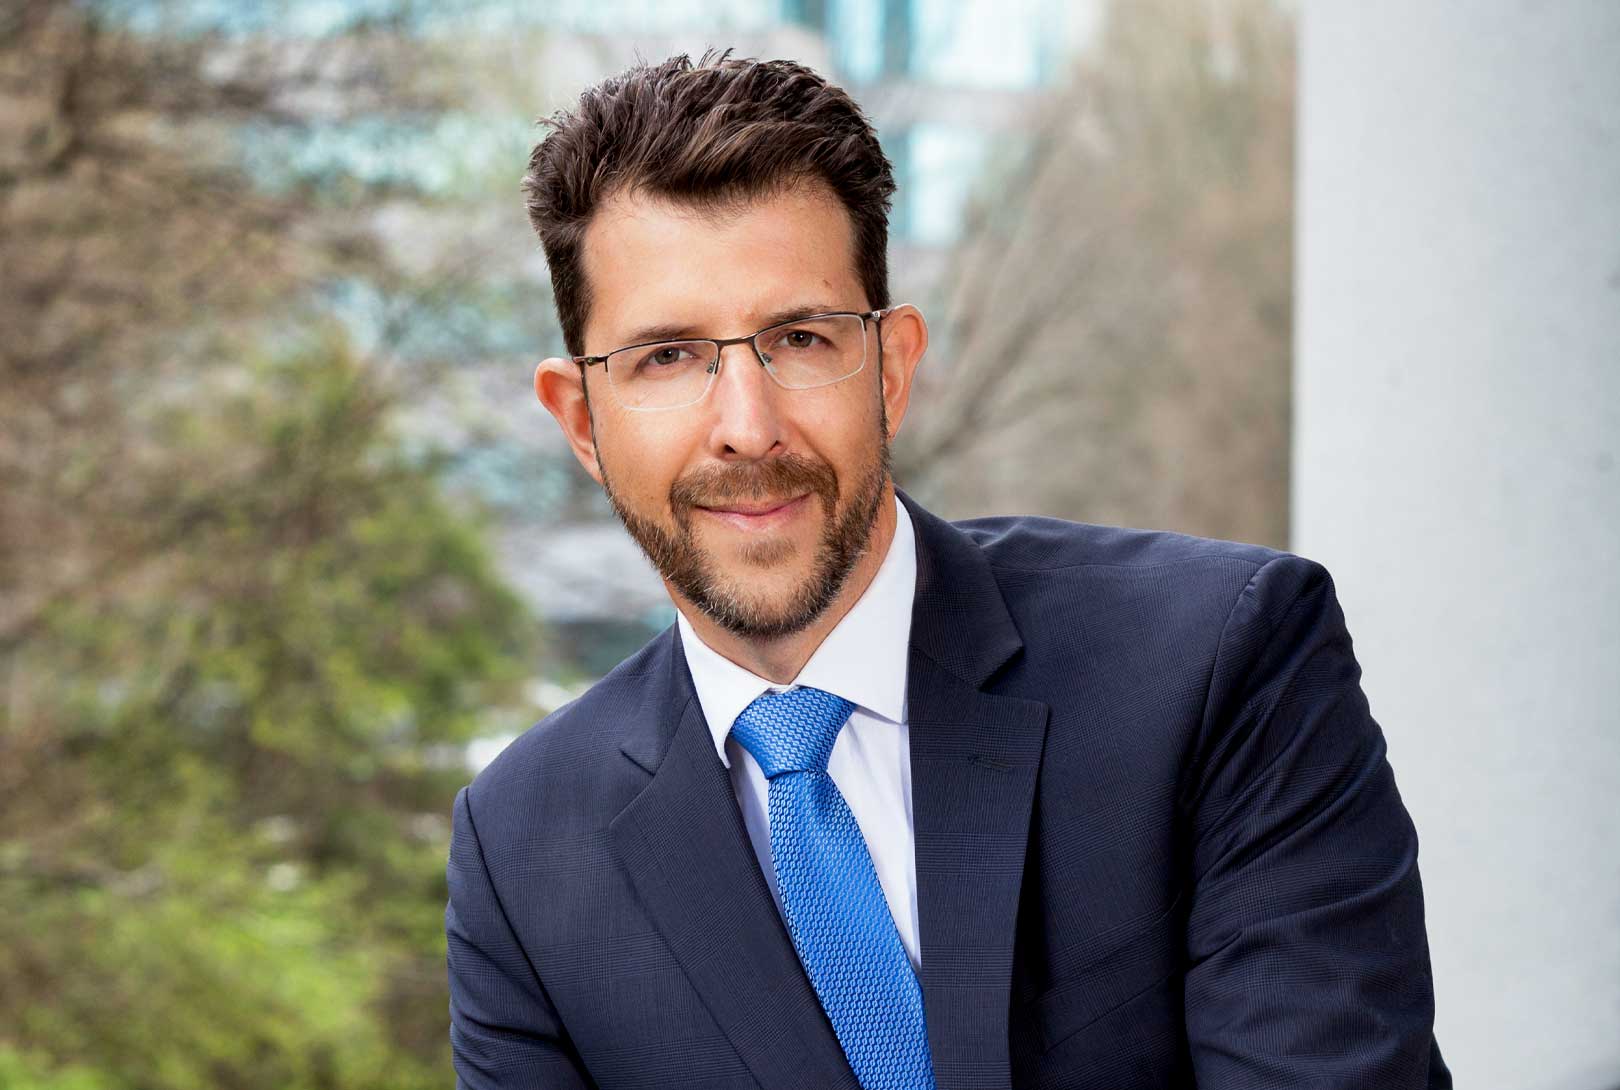 outdoor pr headshot of executive Rene Marzagao wearing a blue suit and tie with glasses